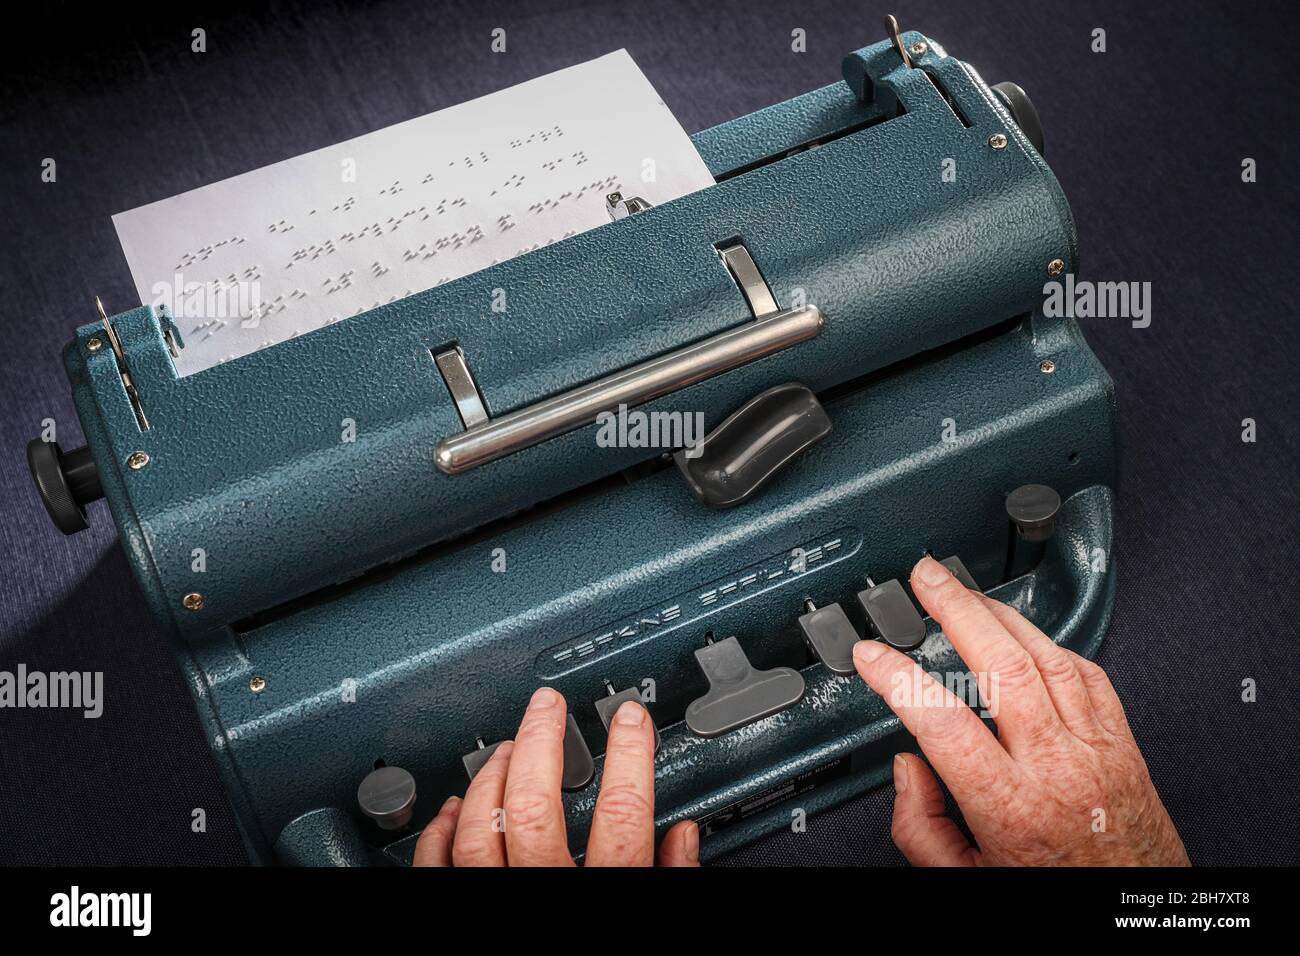 A woman typing in braille using a Perkins Brailler typewriter. Stock Photo